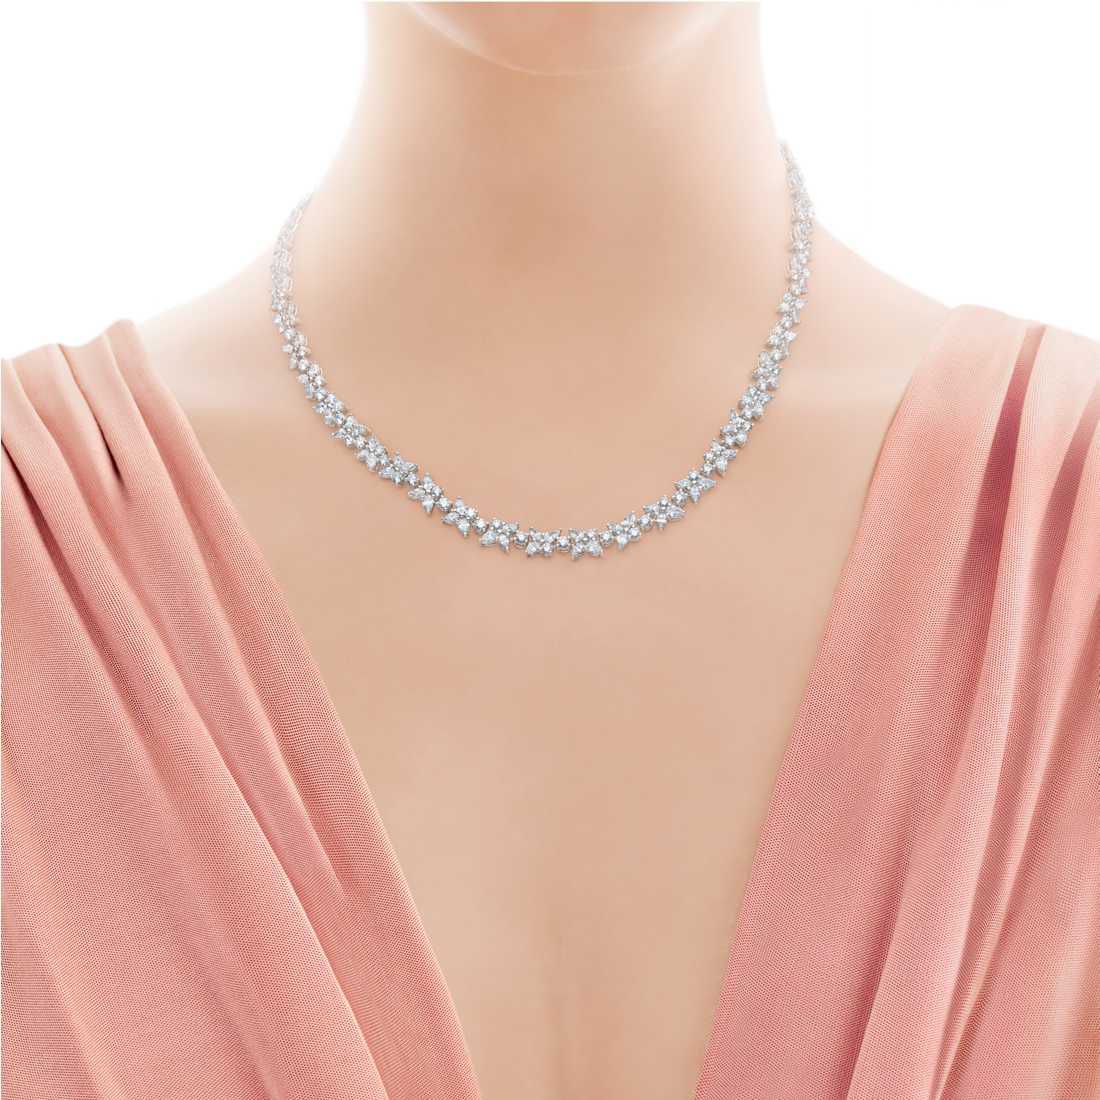 tiffany-victoriamixed-cluster-necklace-35092927_950473_sv_1